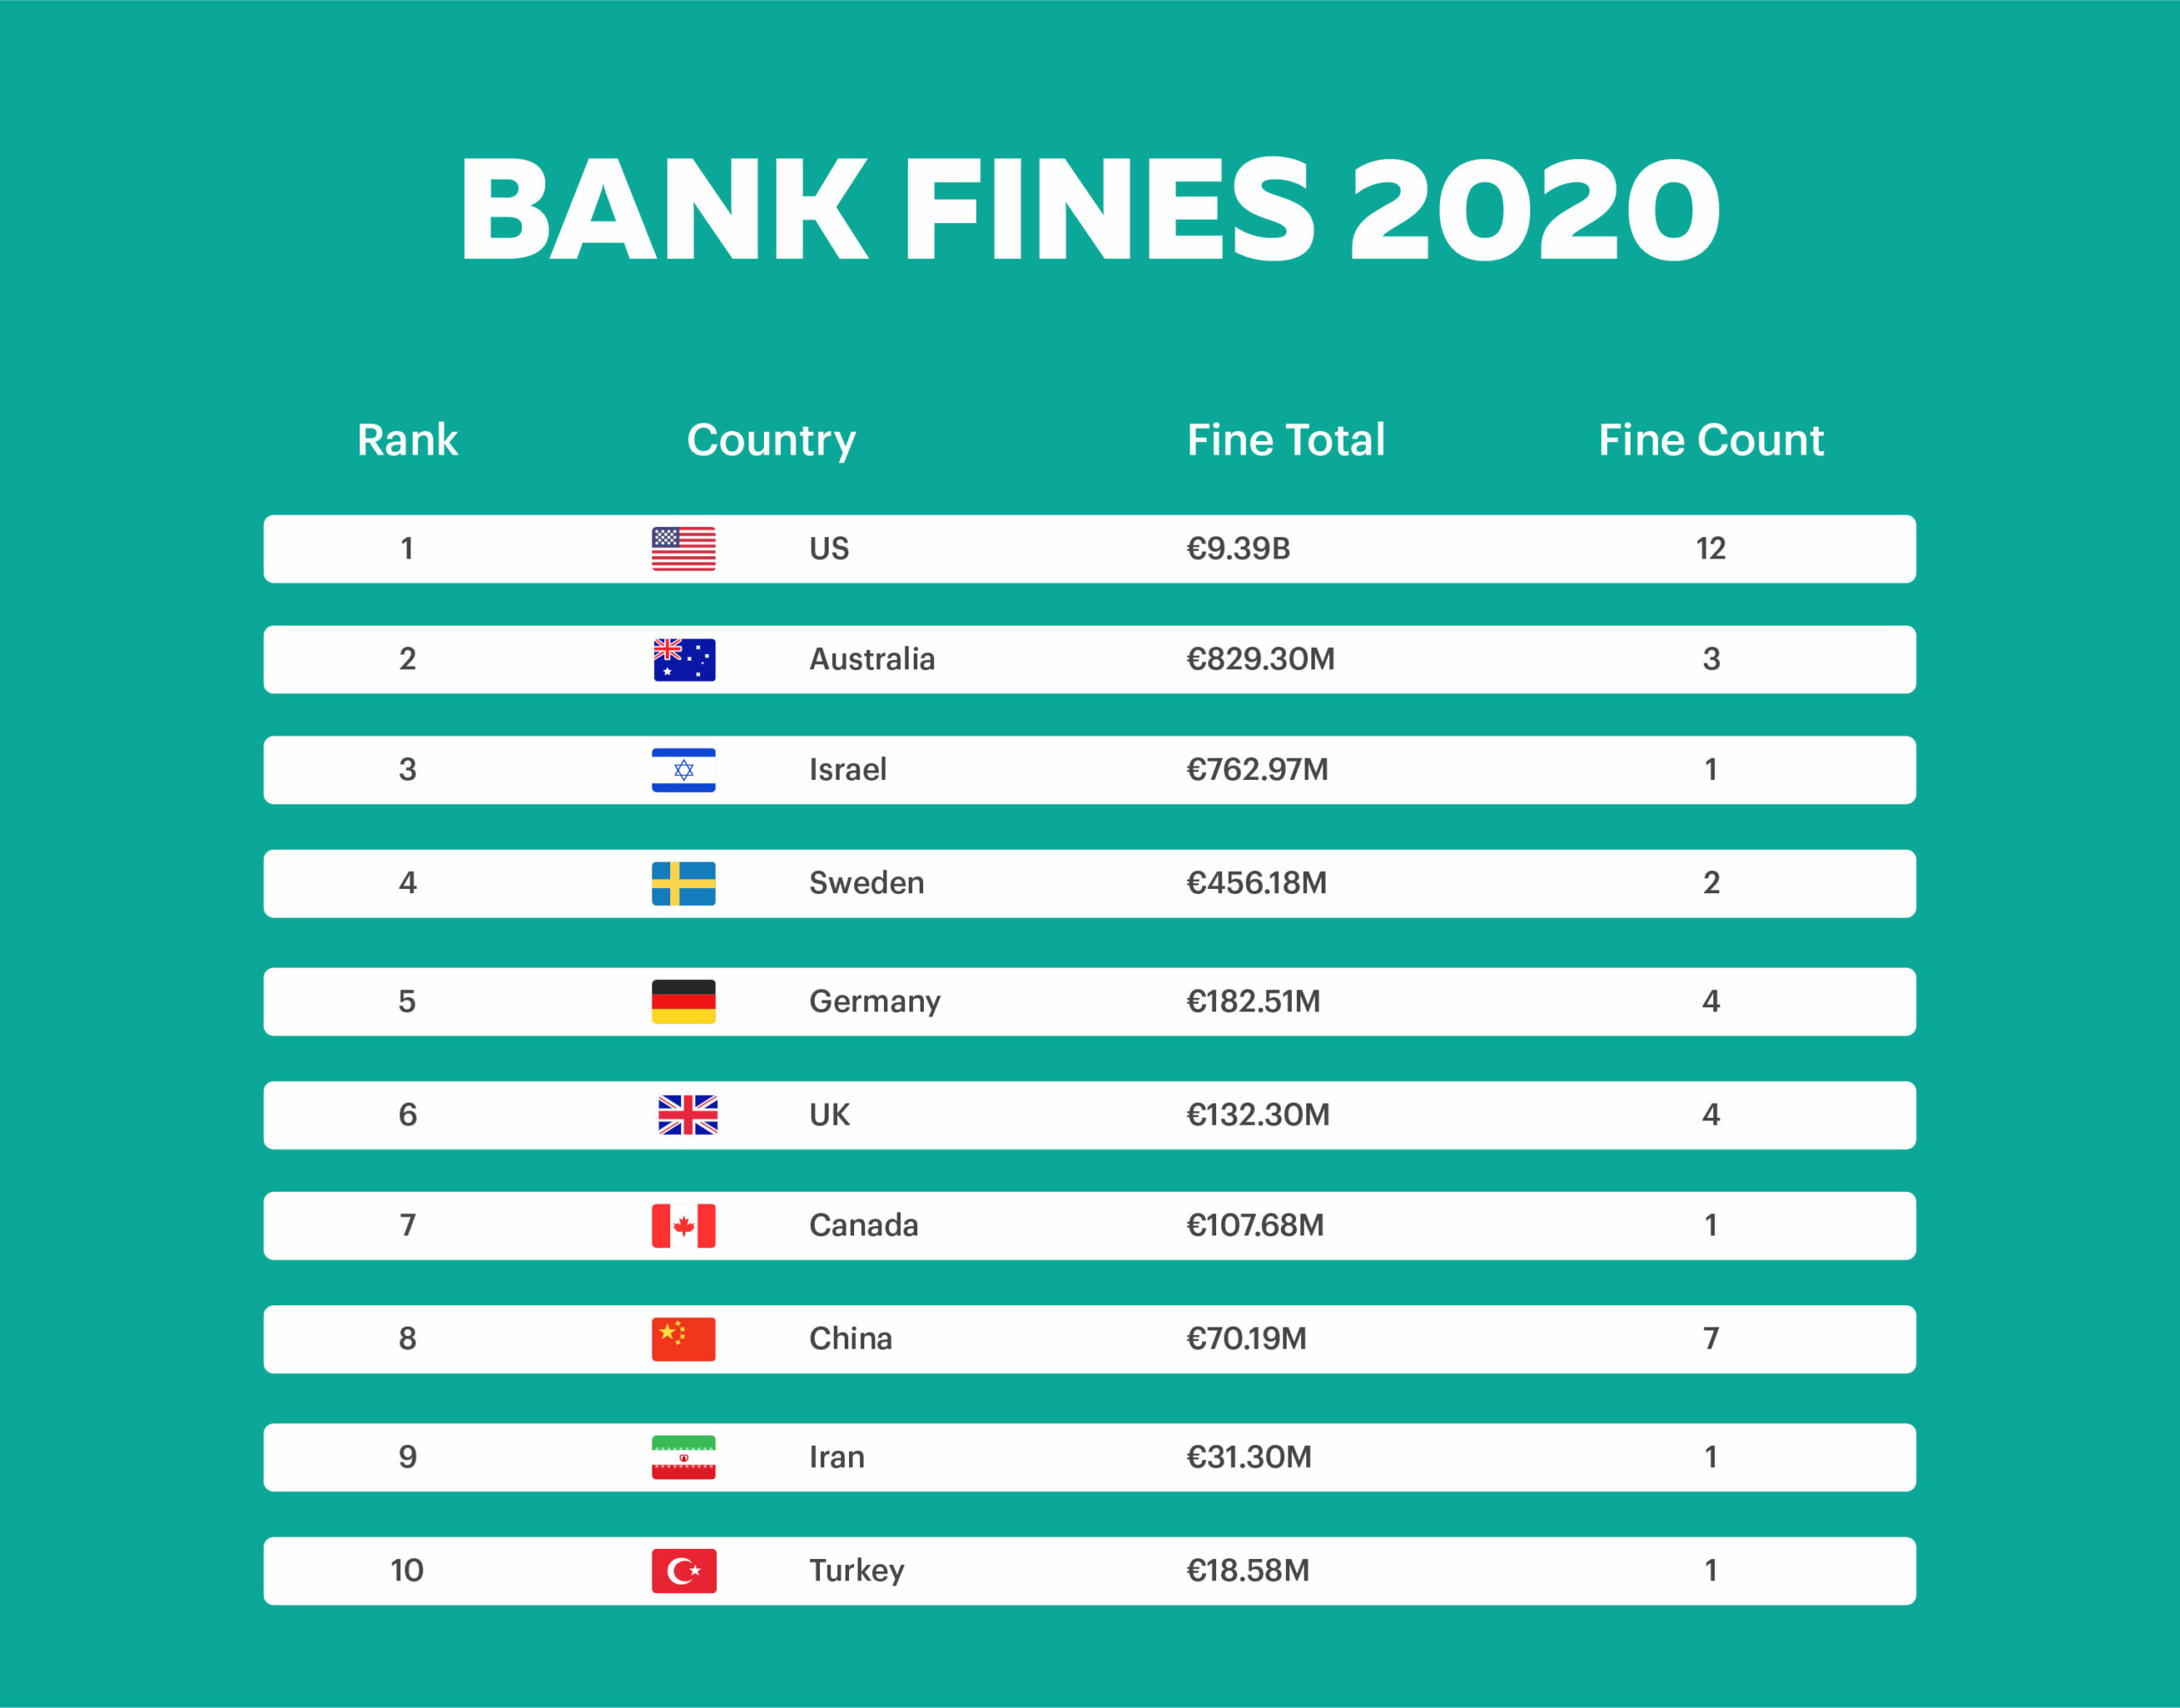 Bank-Fines-2020-news-image-01-01-scale